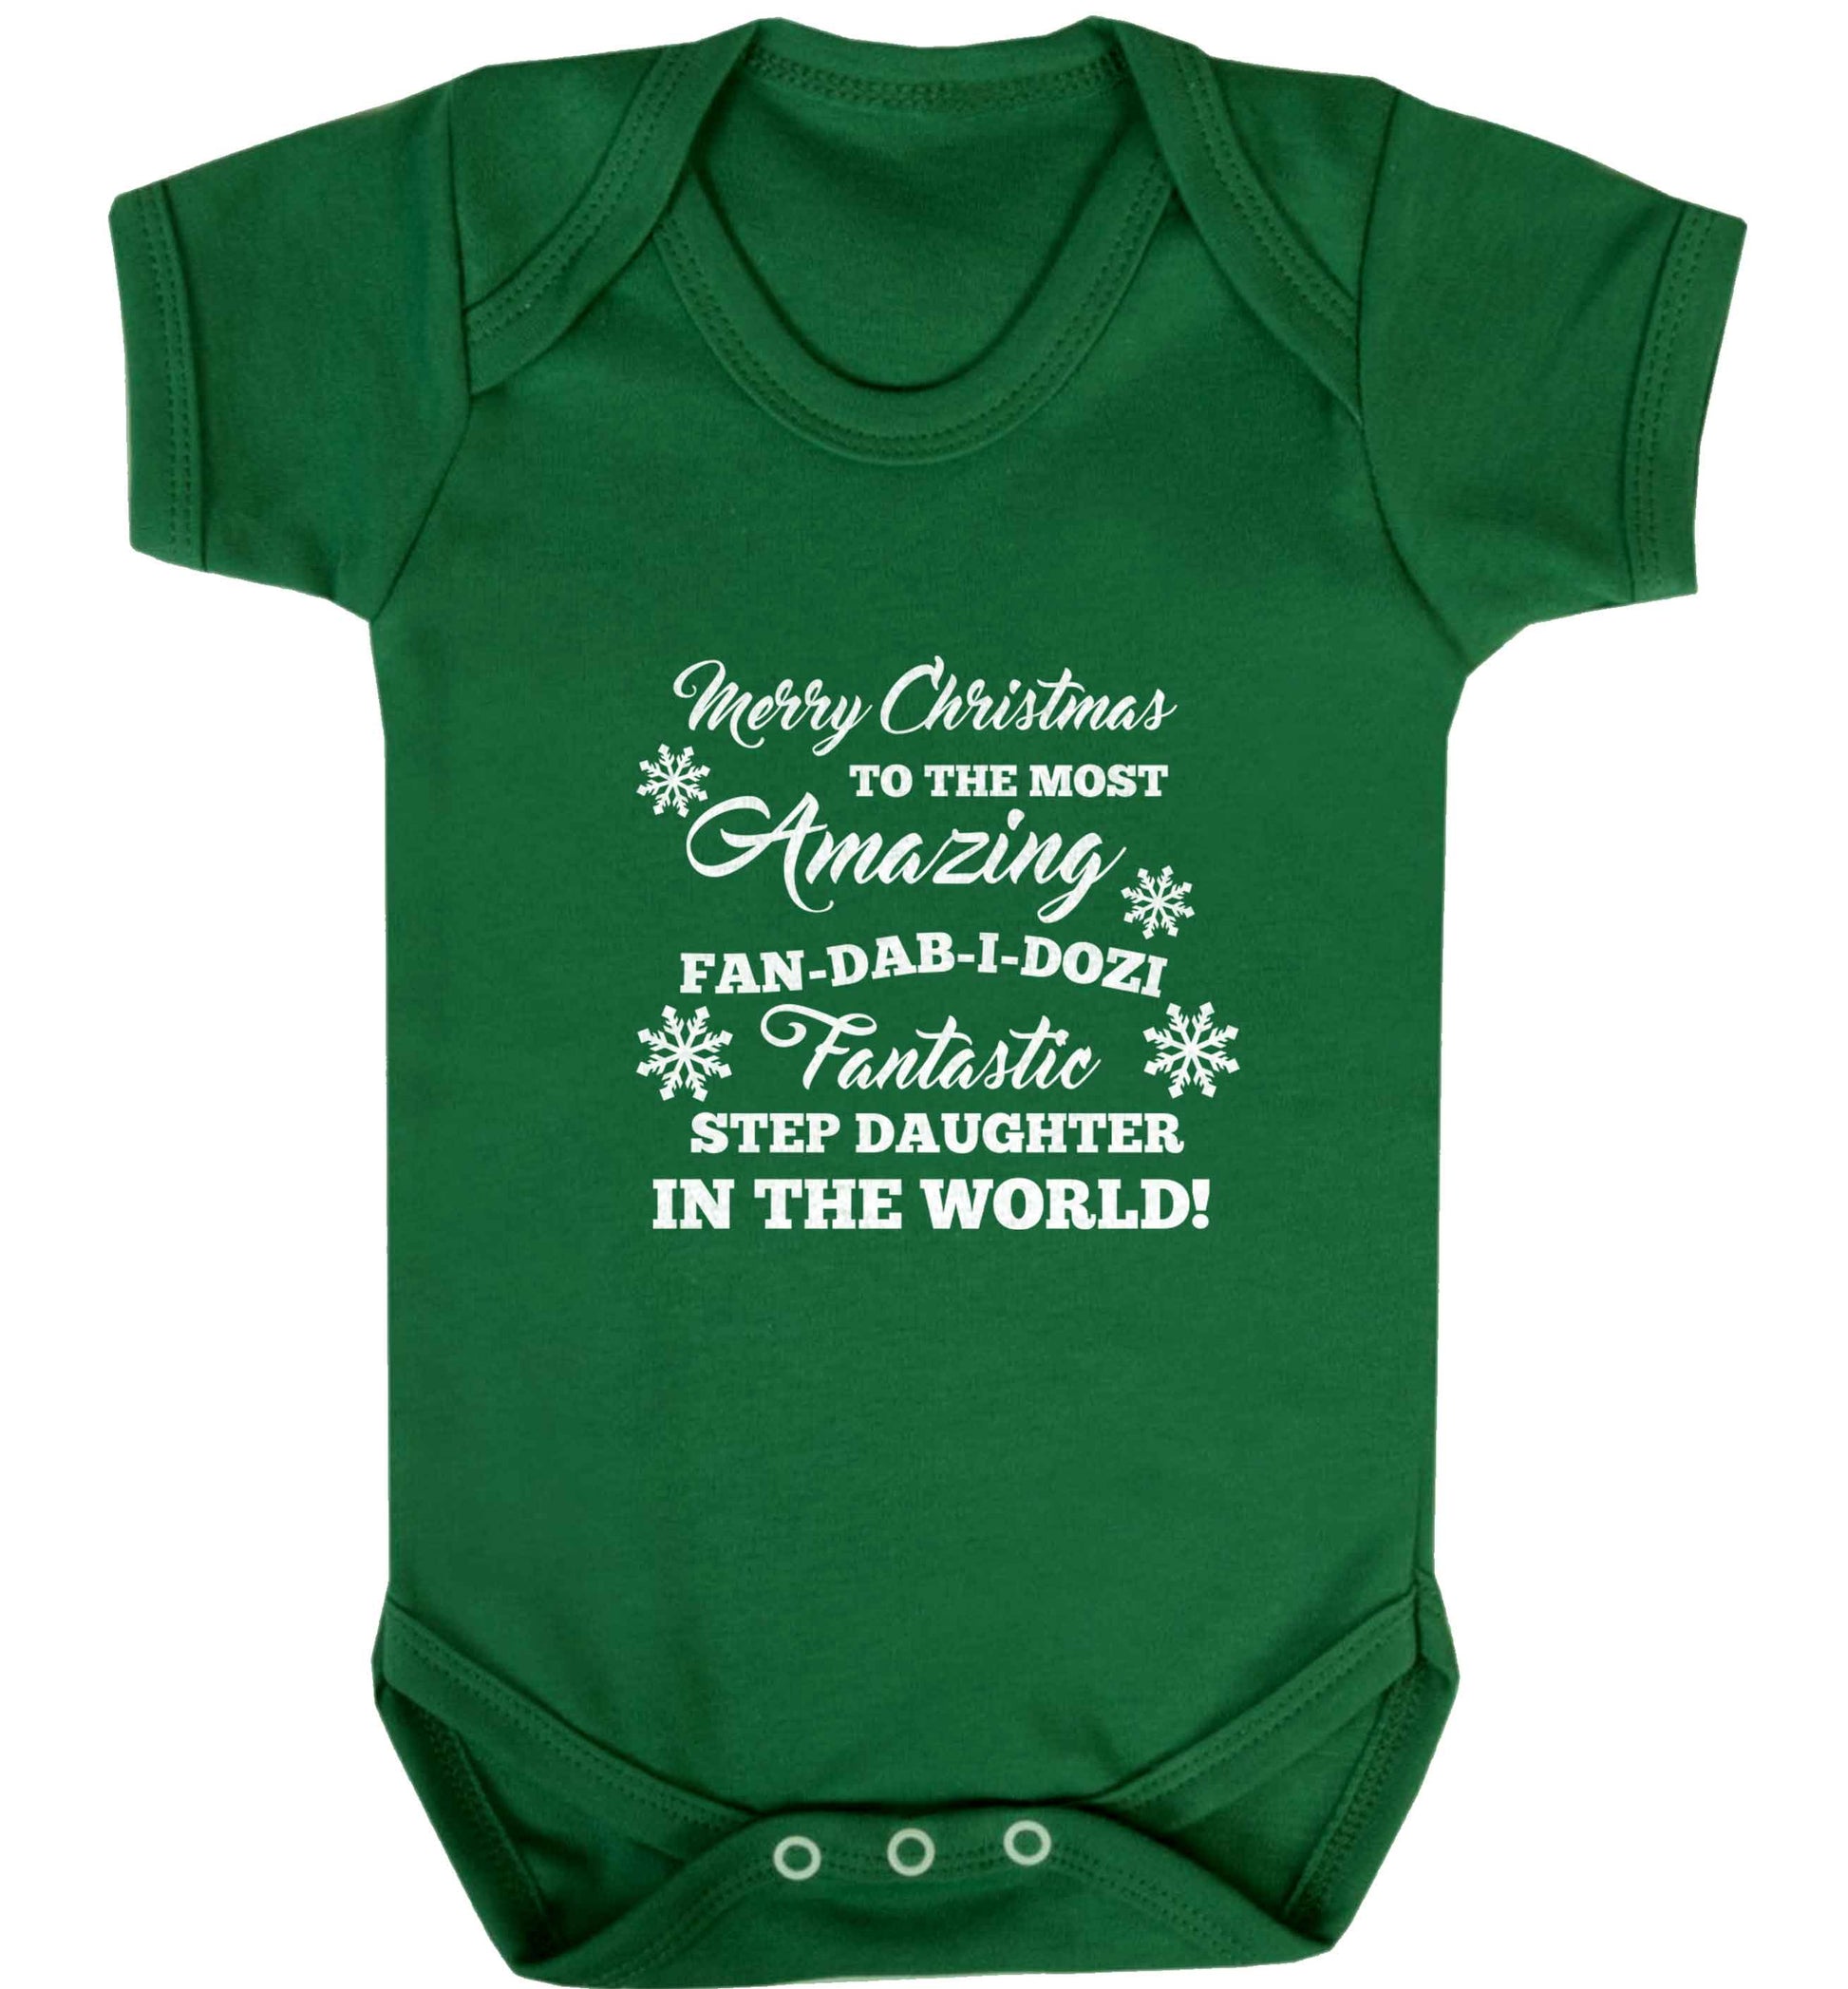 Merry Christmas to the most amazing fan-dab-i-dozi fantasic Step Daughter in the world baby vest green 18-24 months